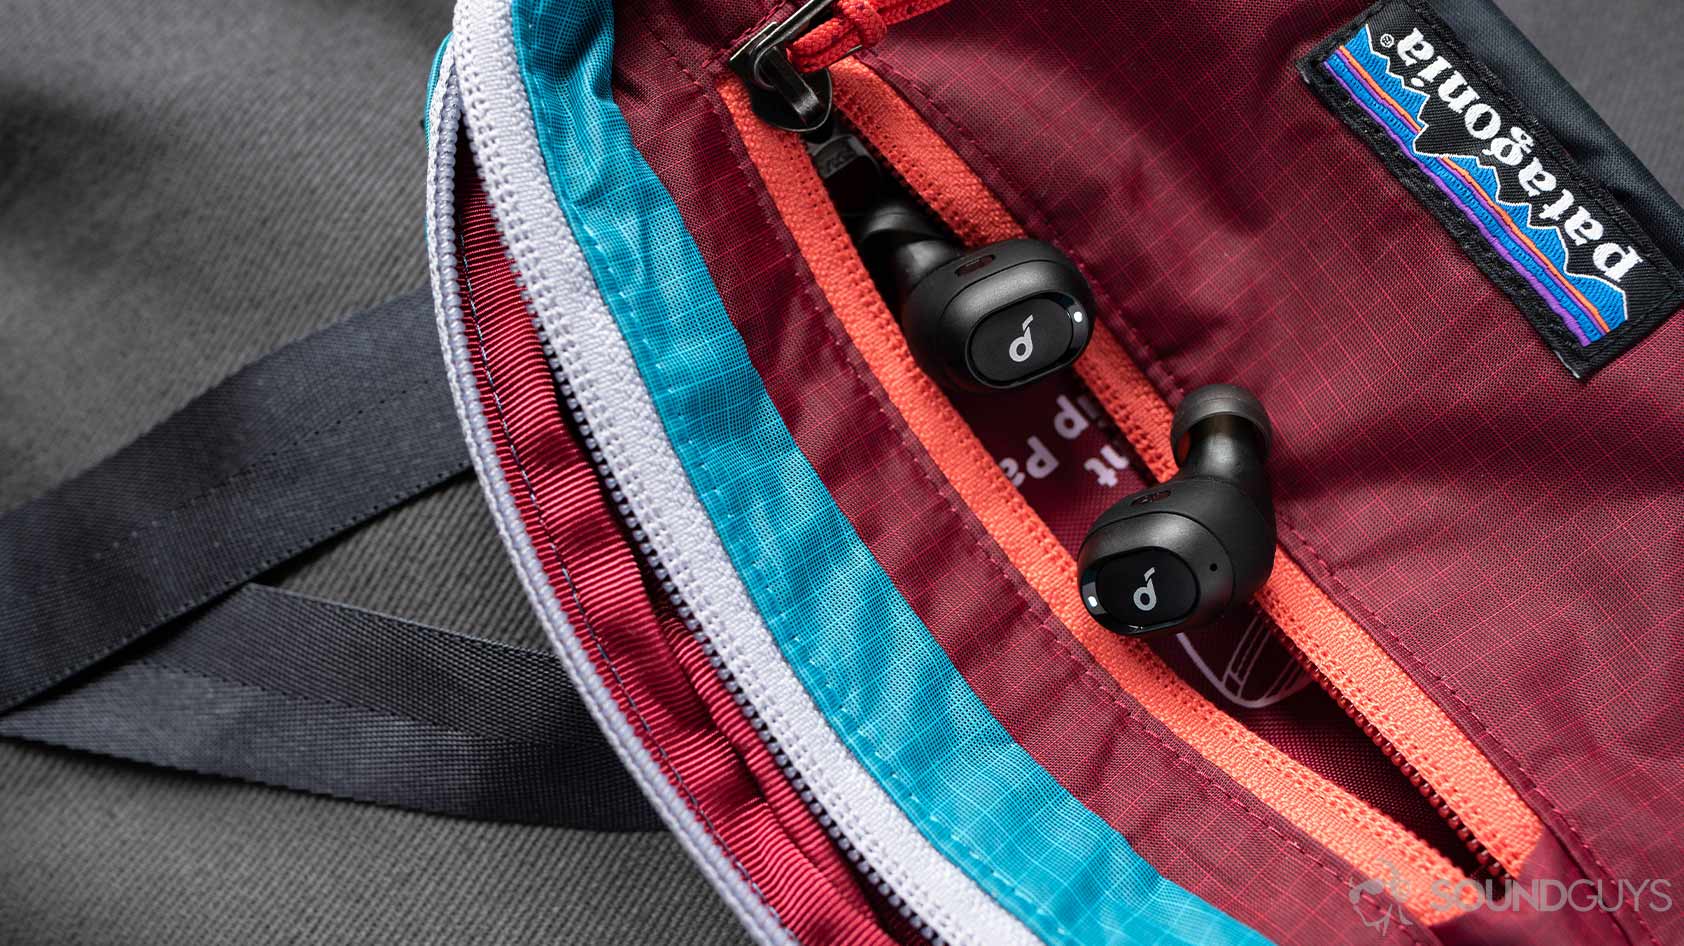 A picture of the Anker SoundCore Liberty Neo true wireless earbuds in a Patagonia fanny pack.